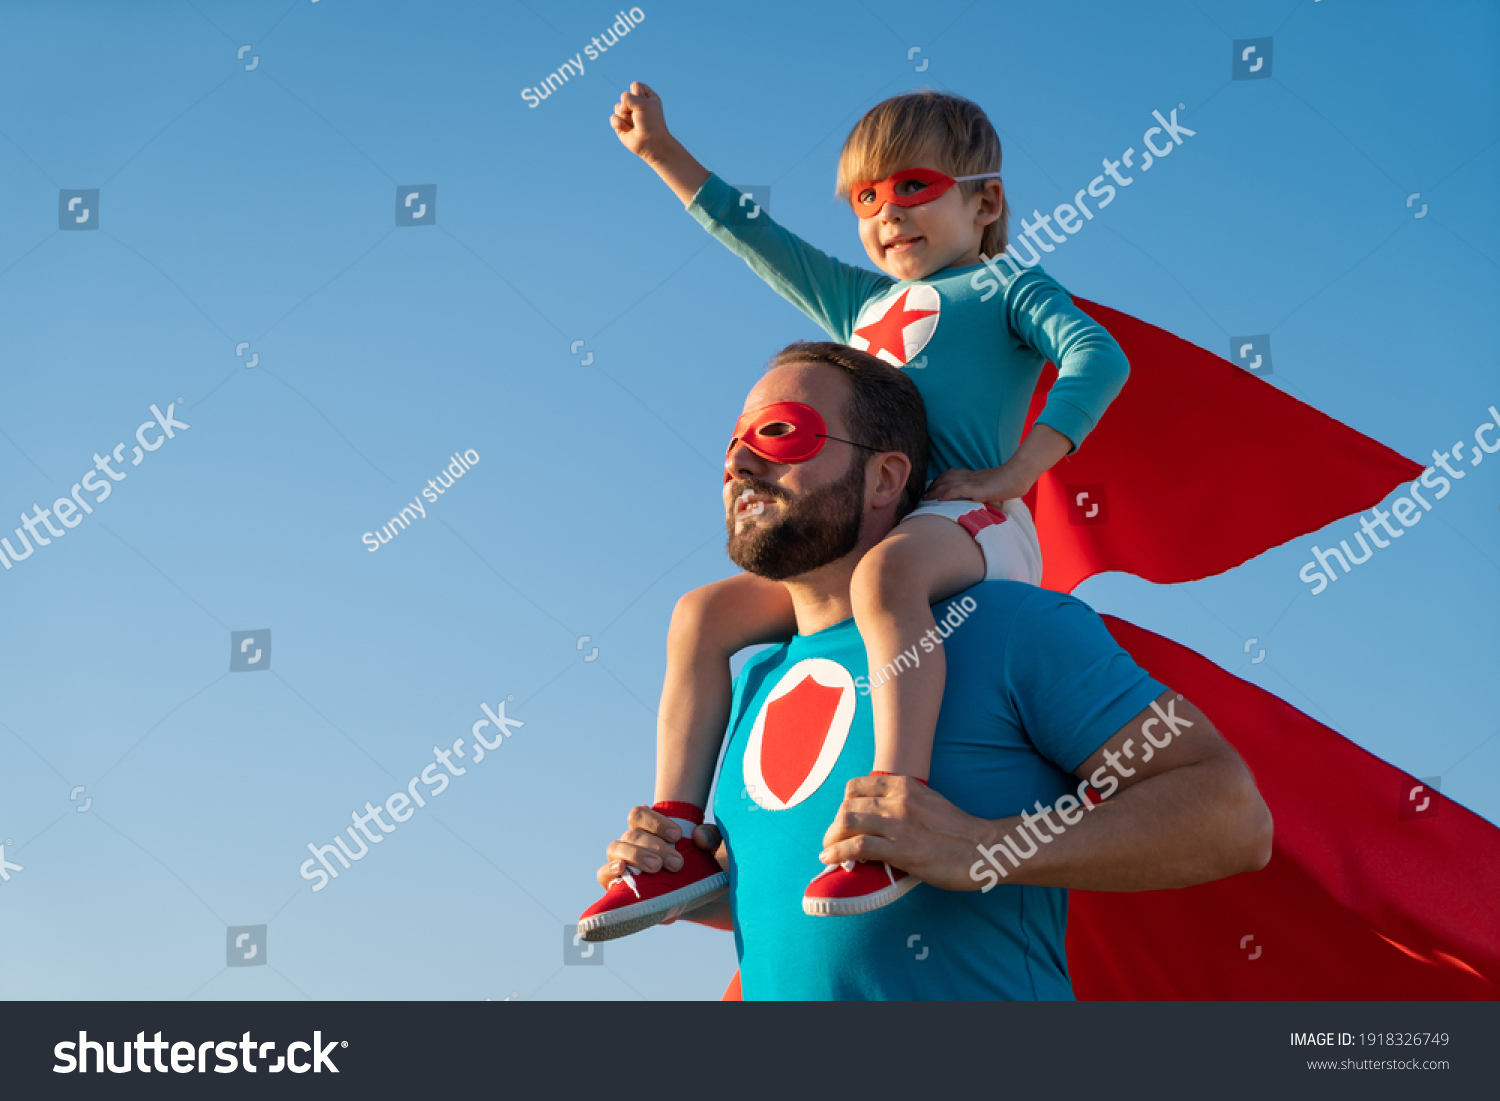 Family of superheroes having fun outdoor. Father and son playing against blue summer sky background. Imagination and freedom concept #1918326749